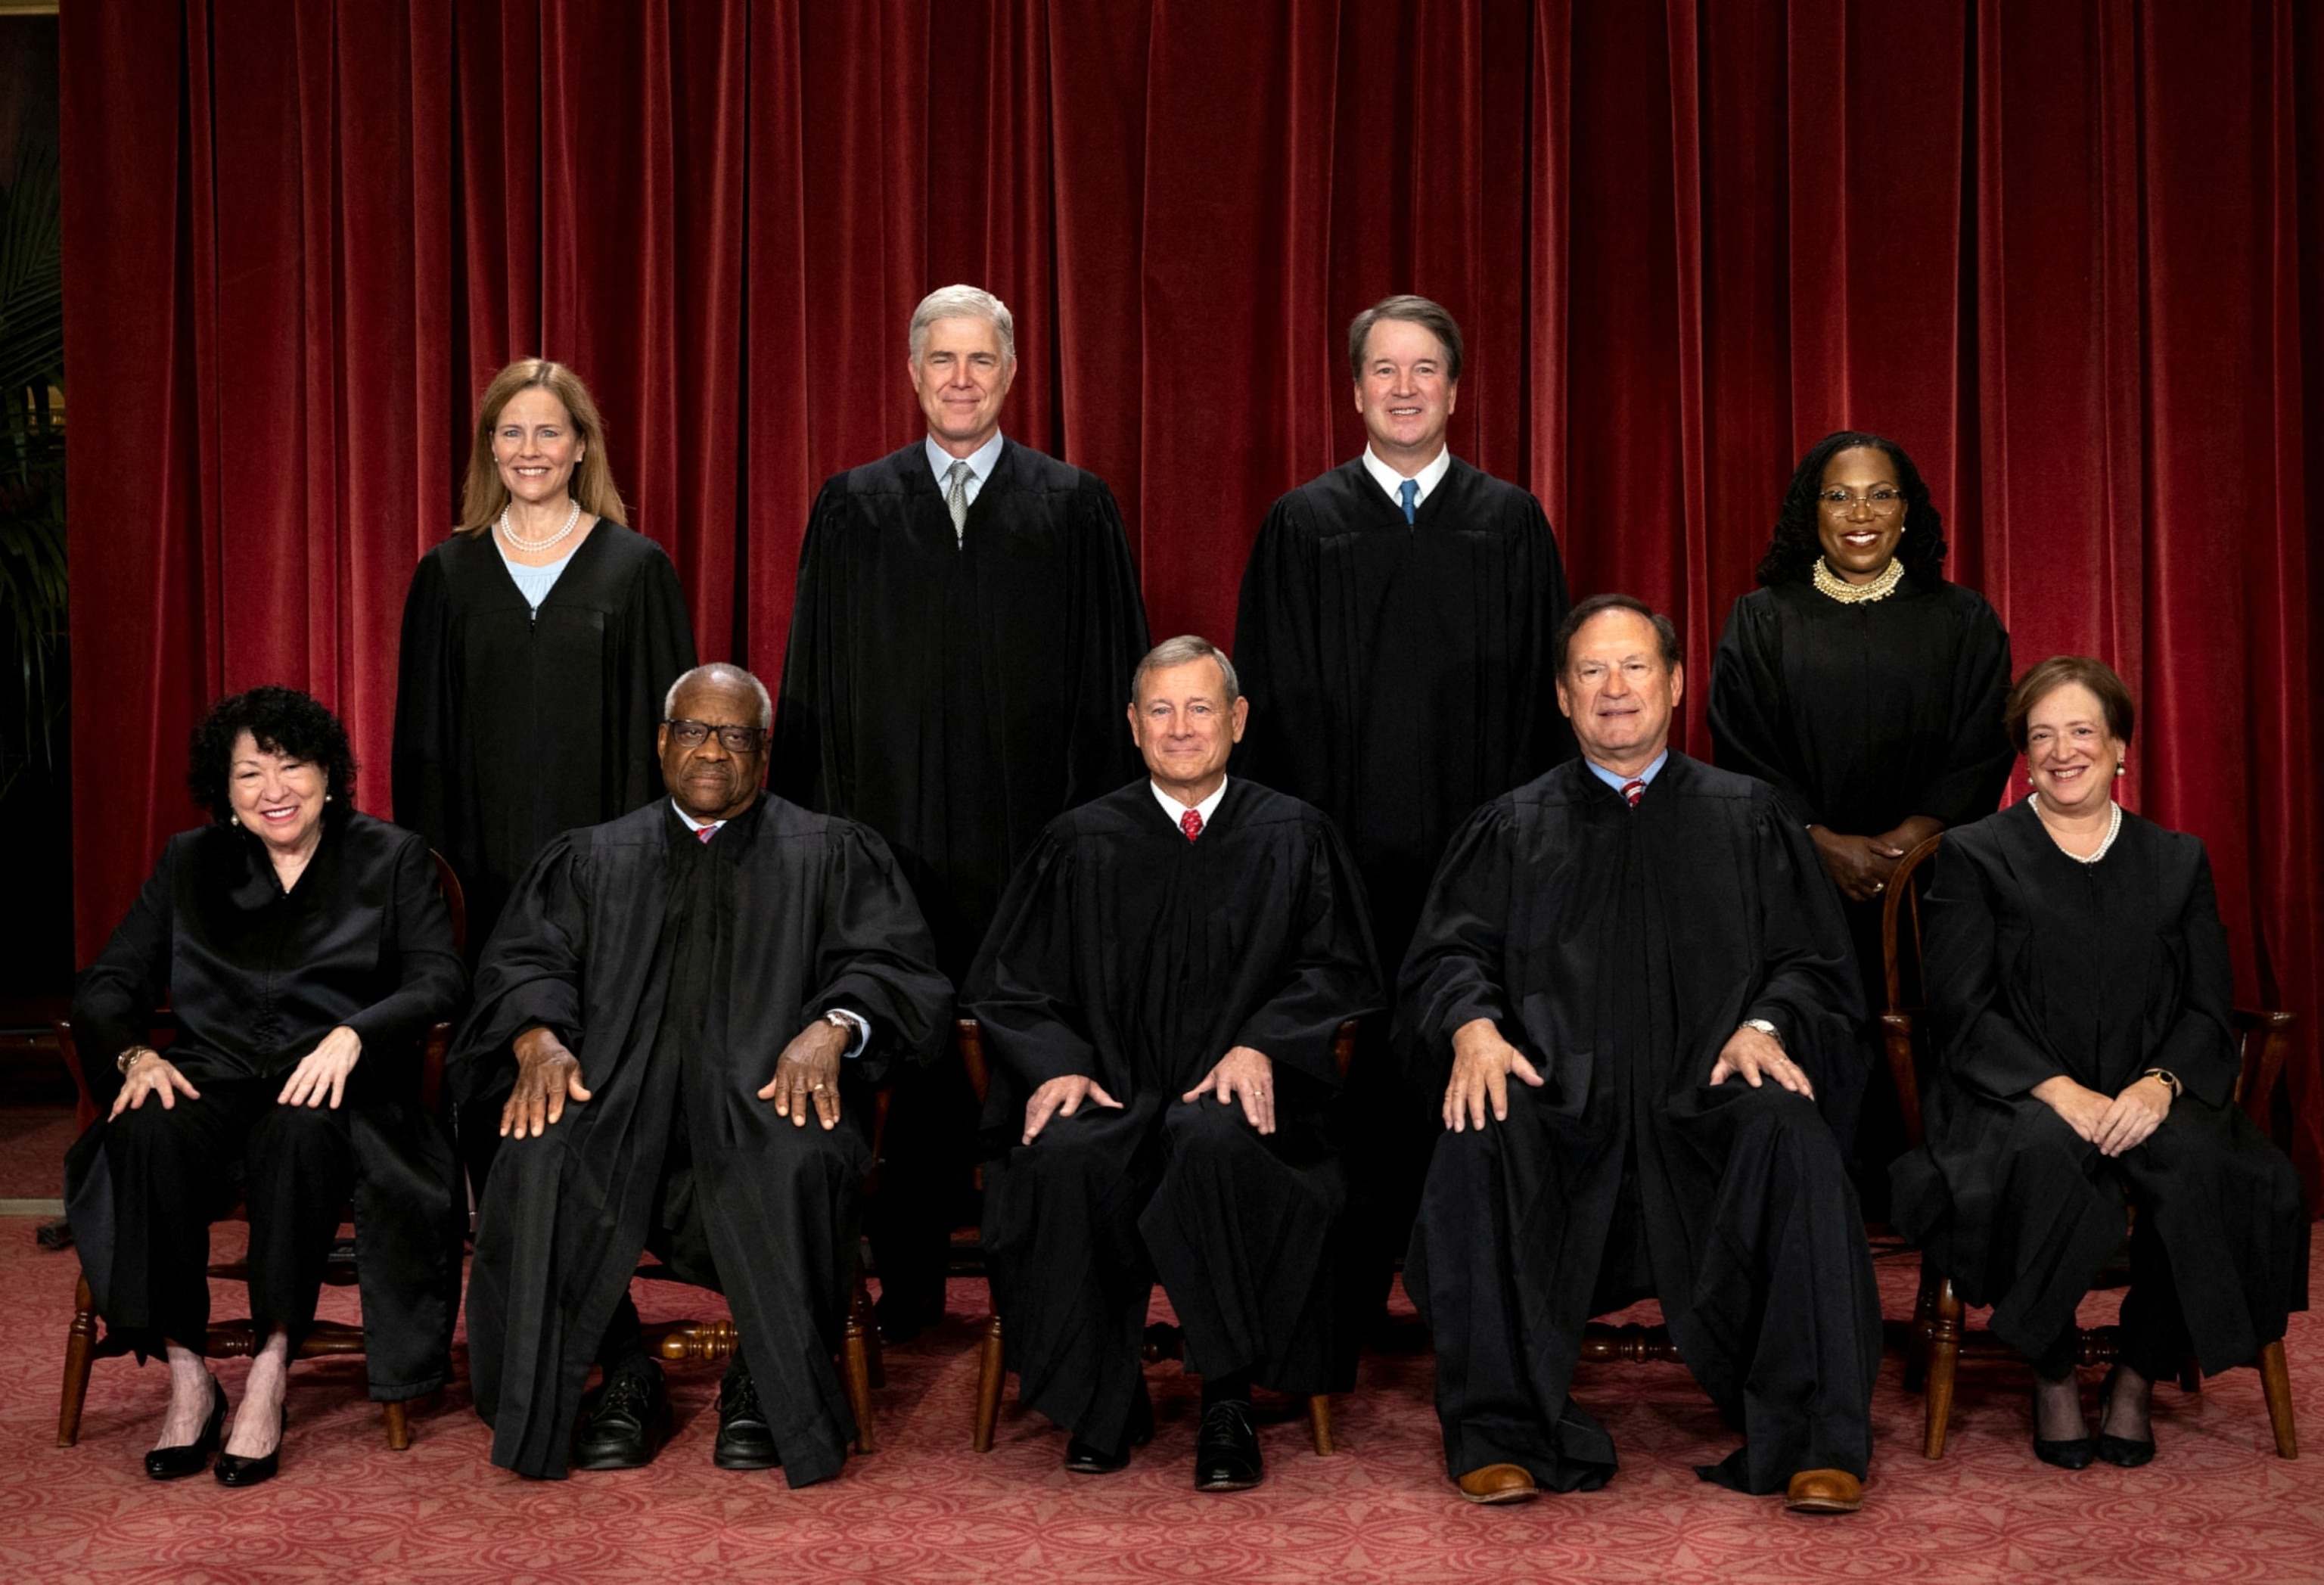 PHOTO: U.S. Supreme Court justices pose for their group portrait at the Supreme Court in Washington